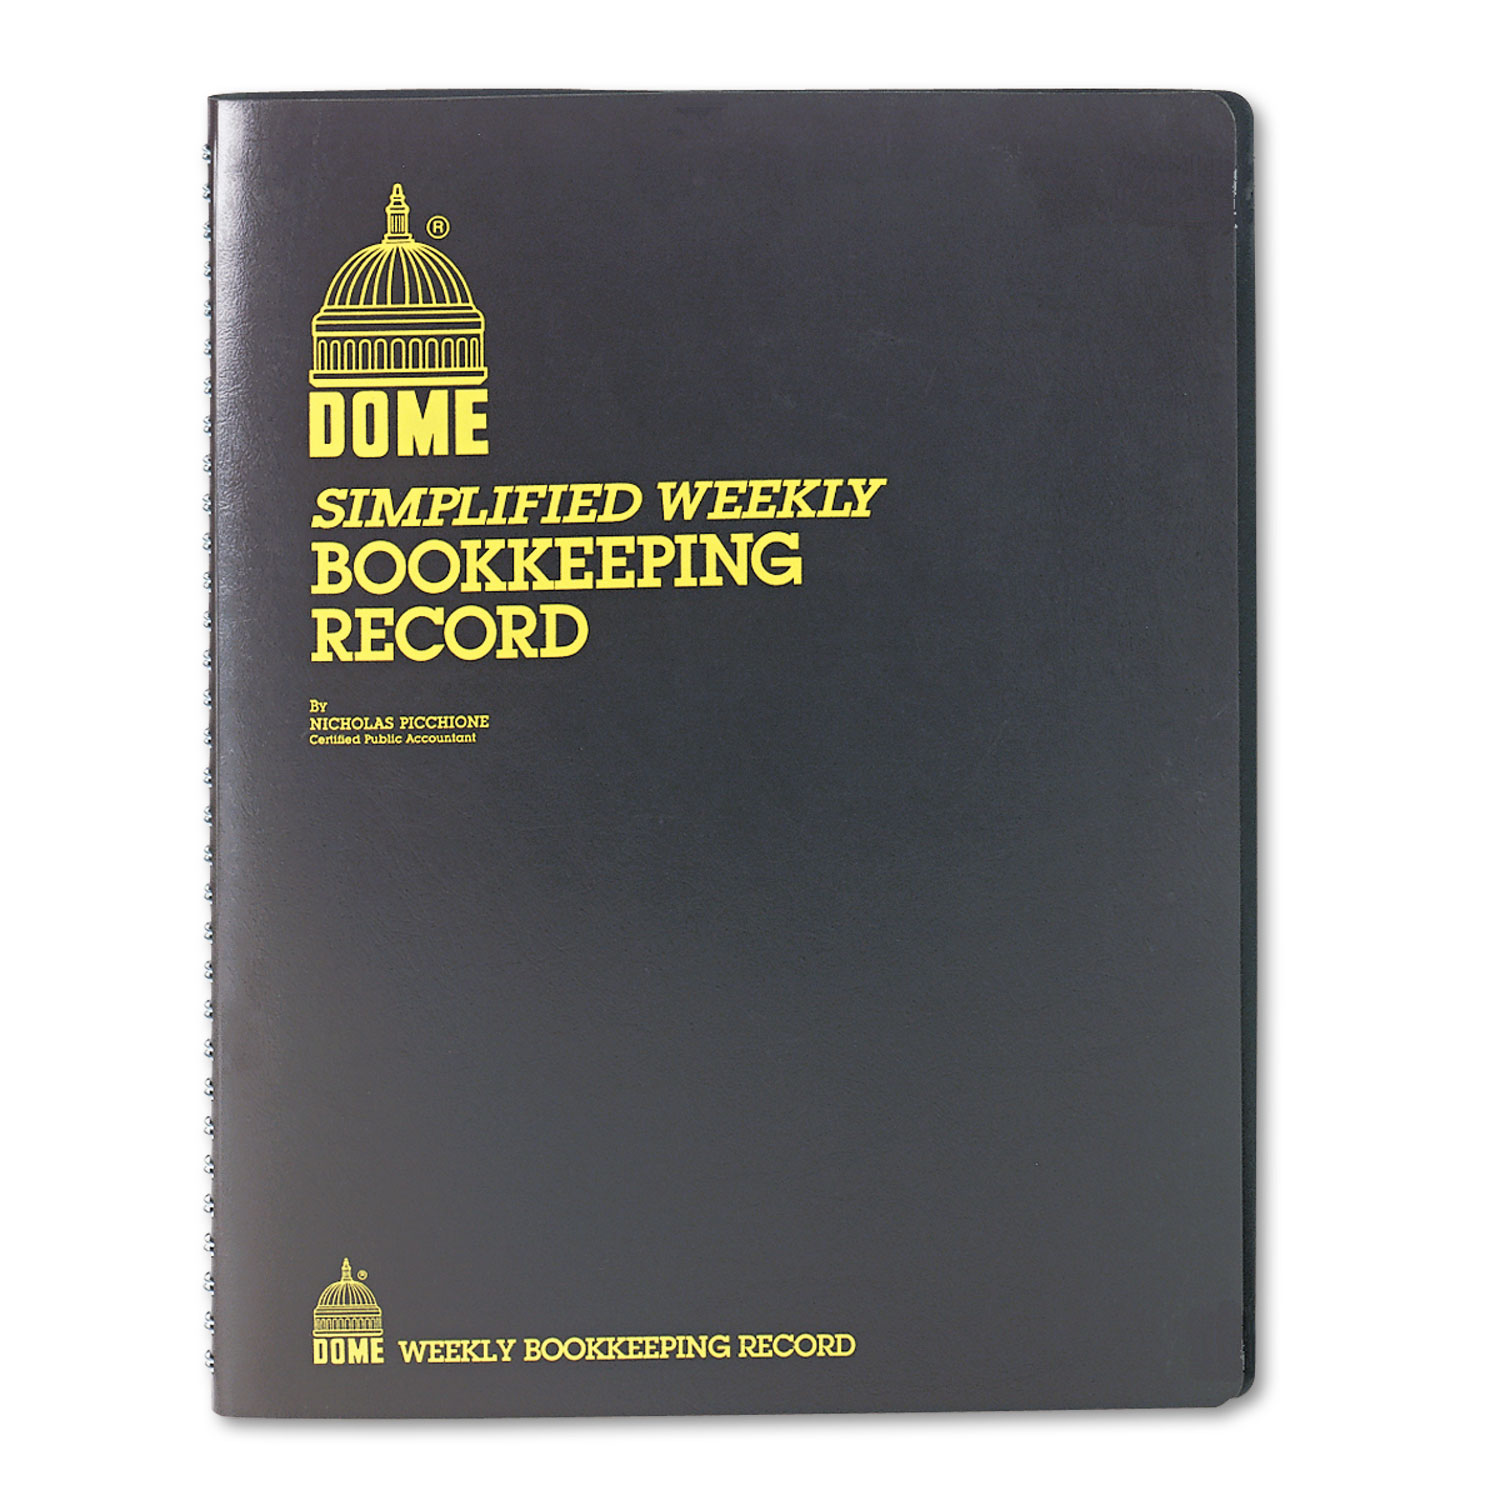 Dome DOM600 Bookkeeping Record, Brown Vinyl Cover, 128 Pages, 8 1/2 x 11 Pages